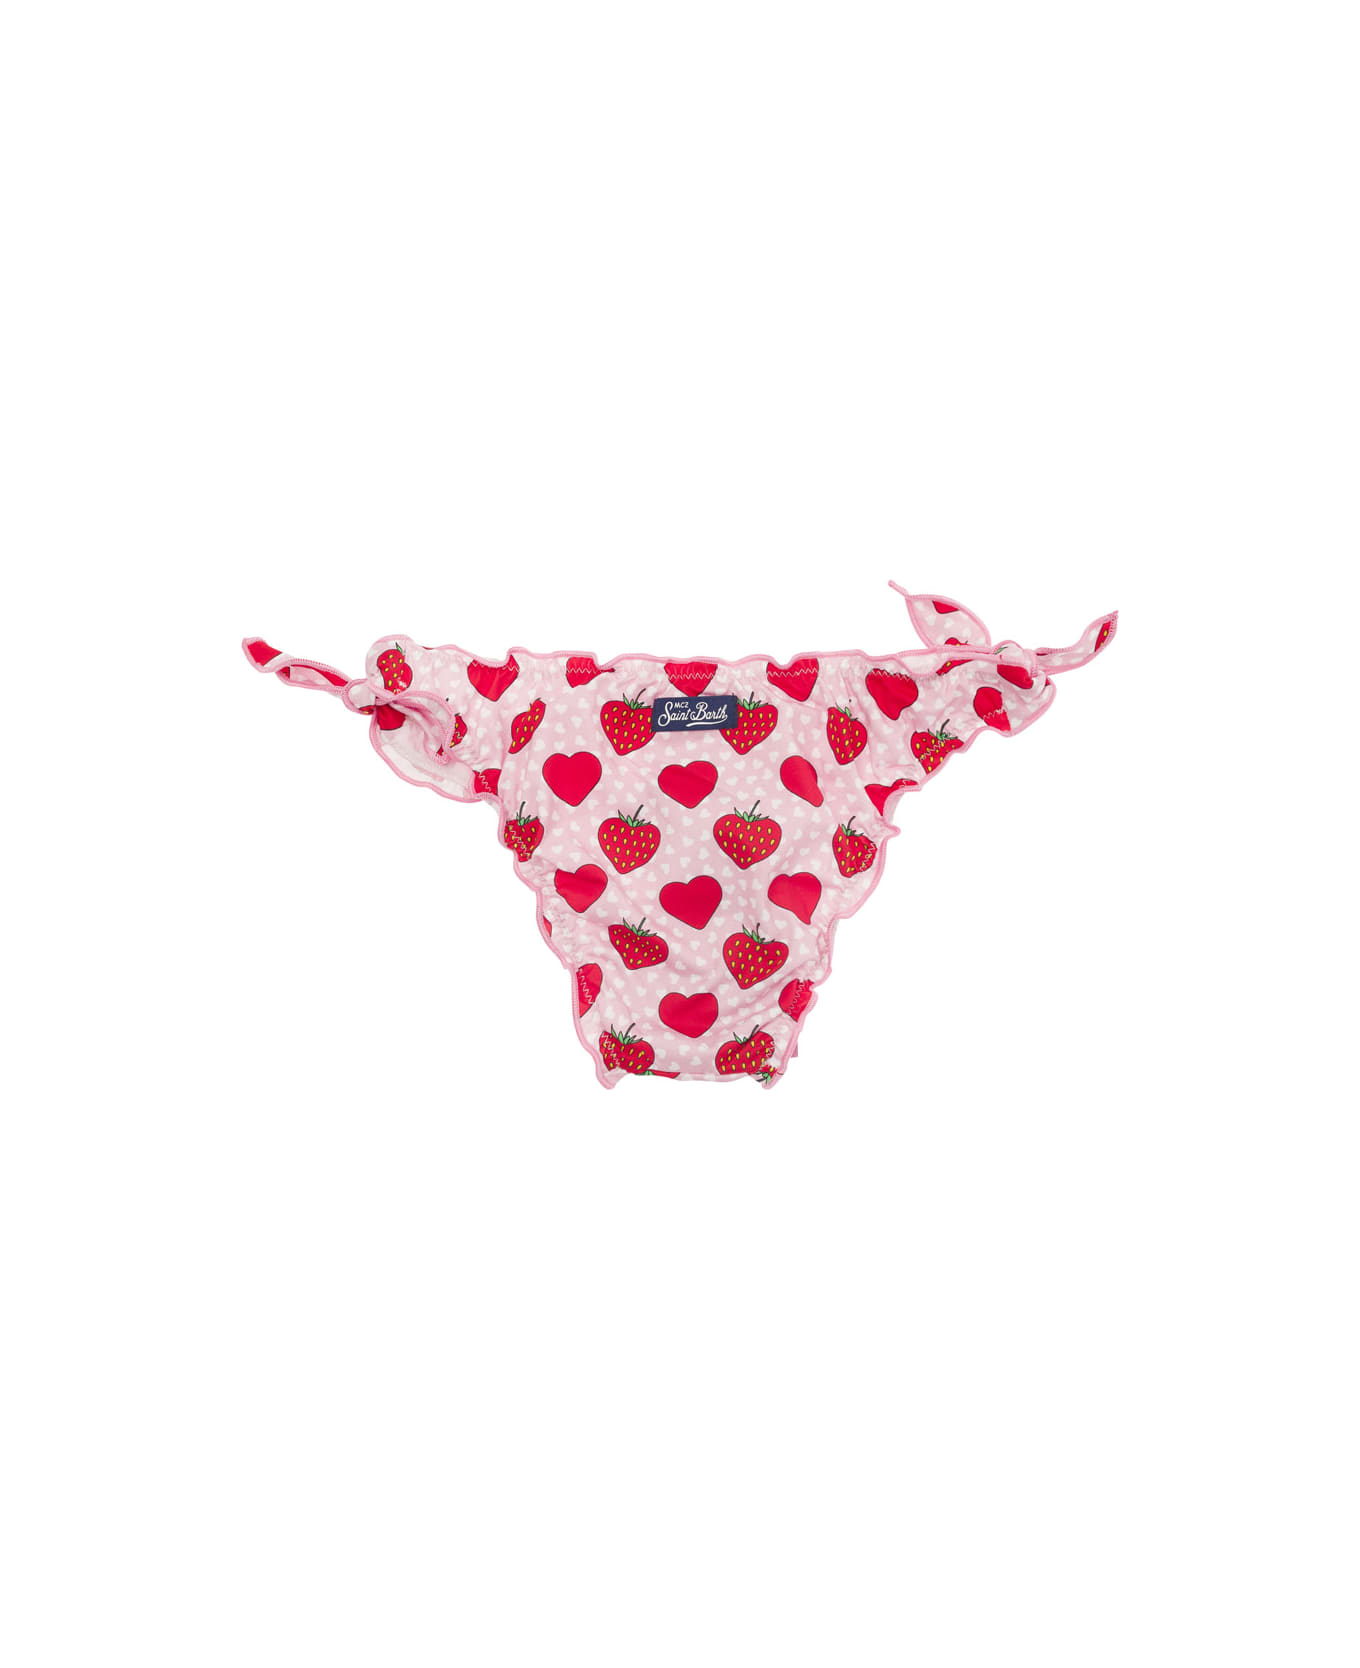 MC2 Saint Barth Pink And Red Bikini Bottom With Strawberry Print In Stretch Fabric Girl - Multicolor